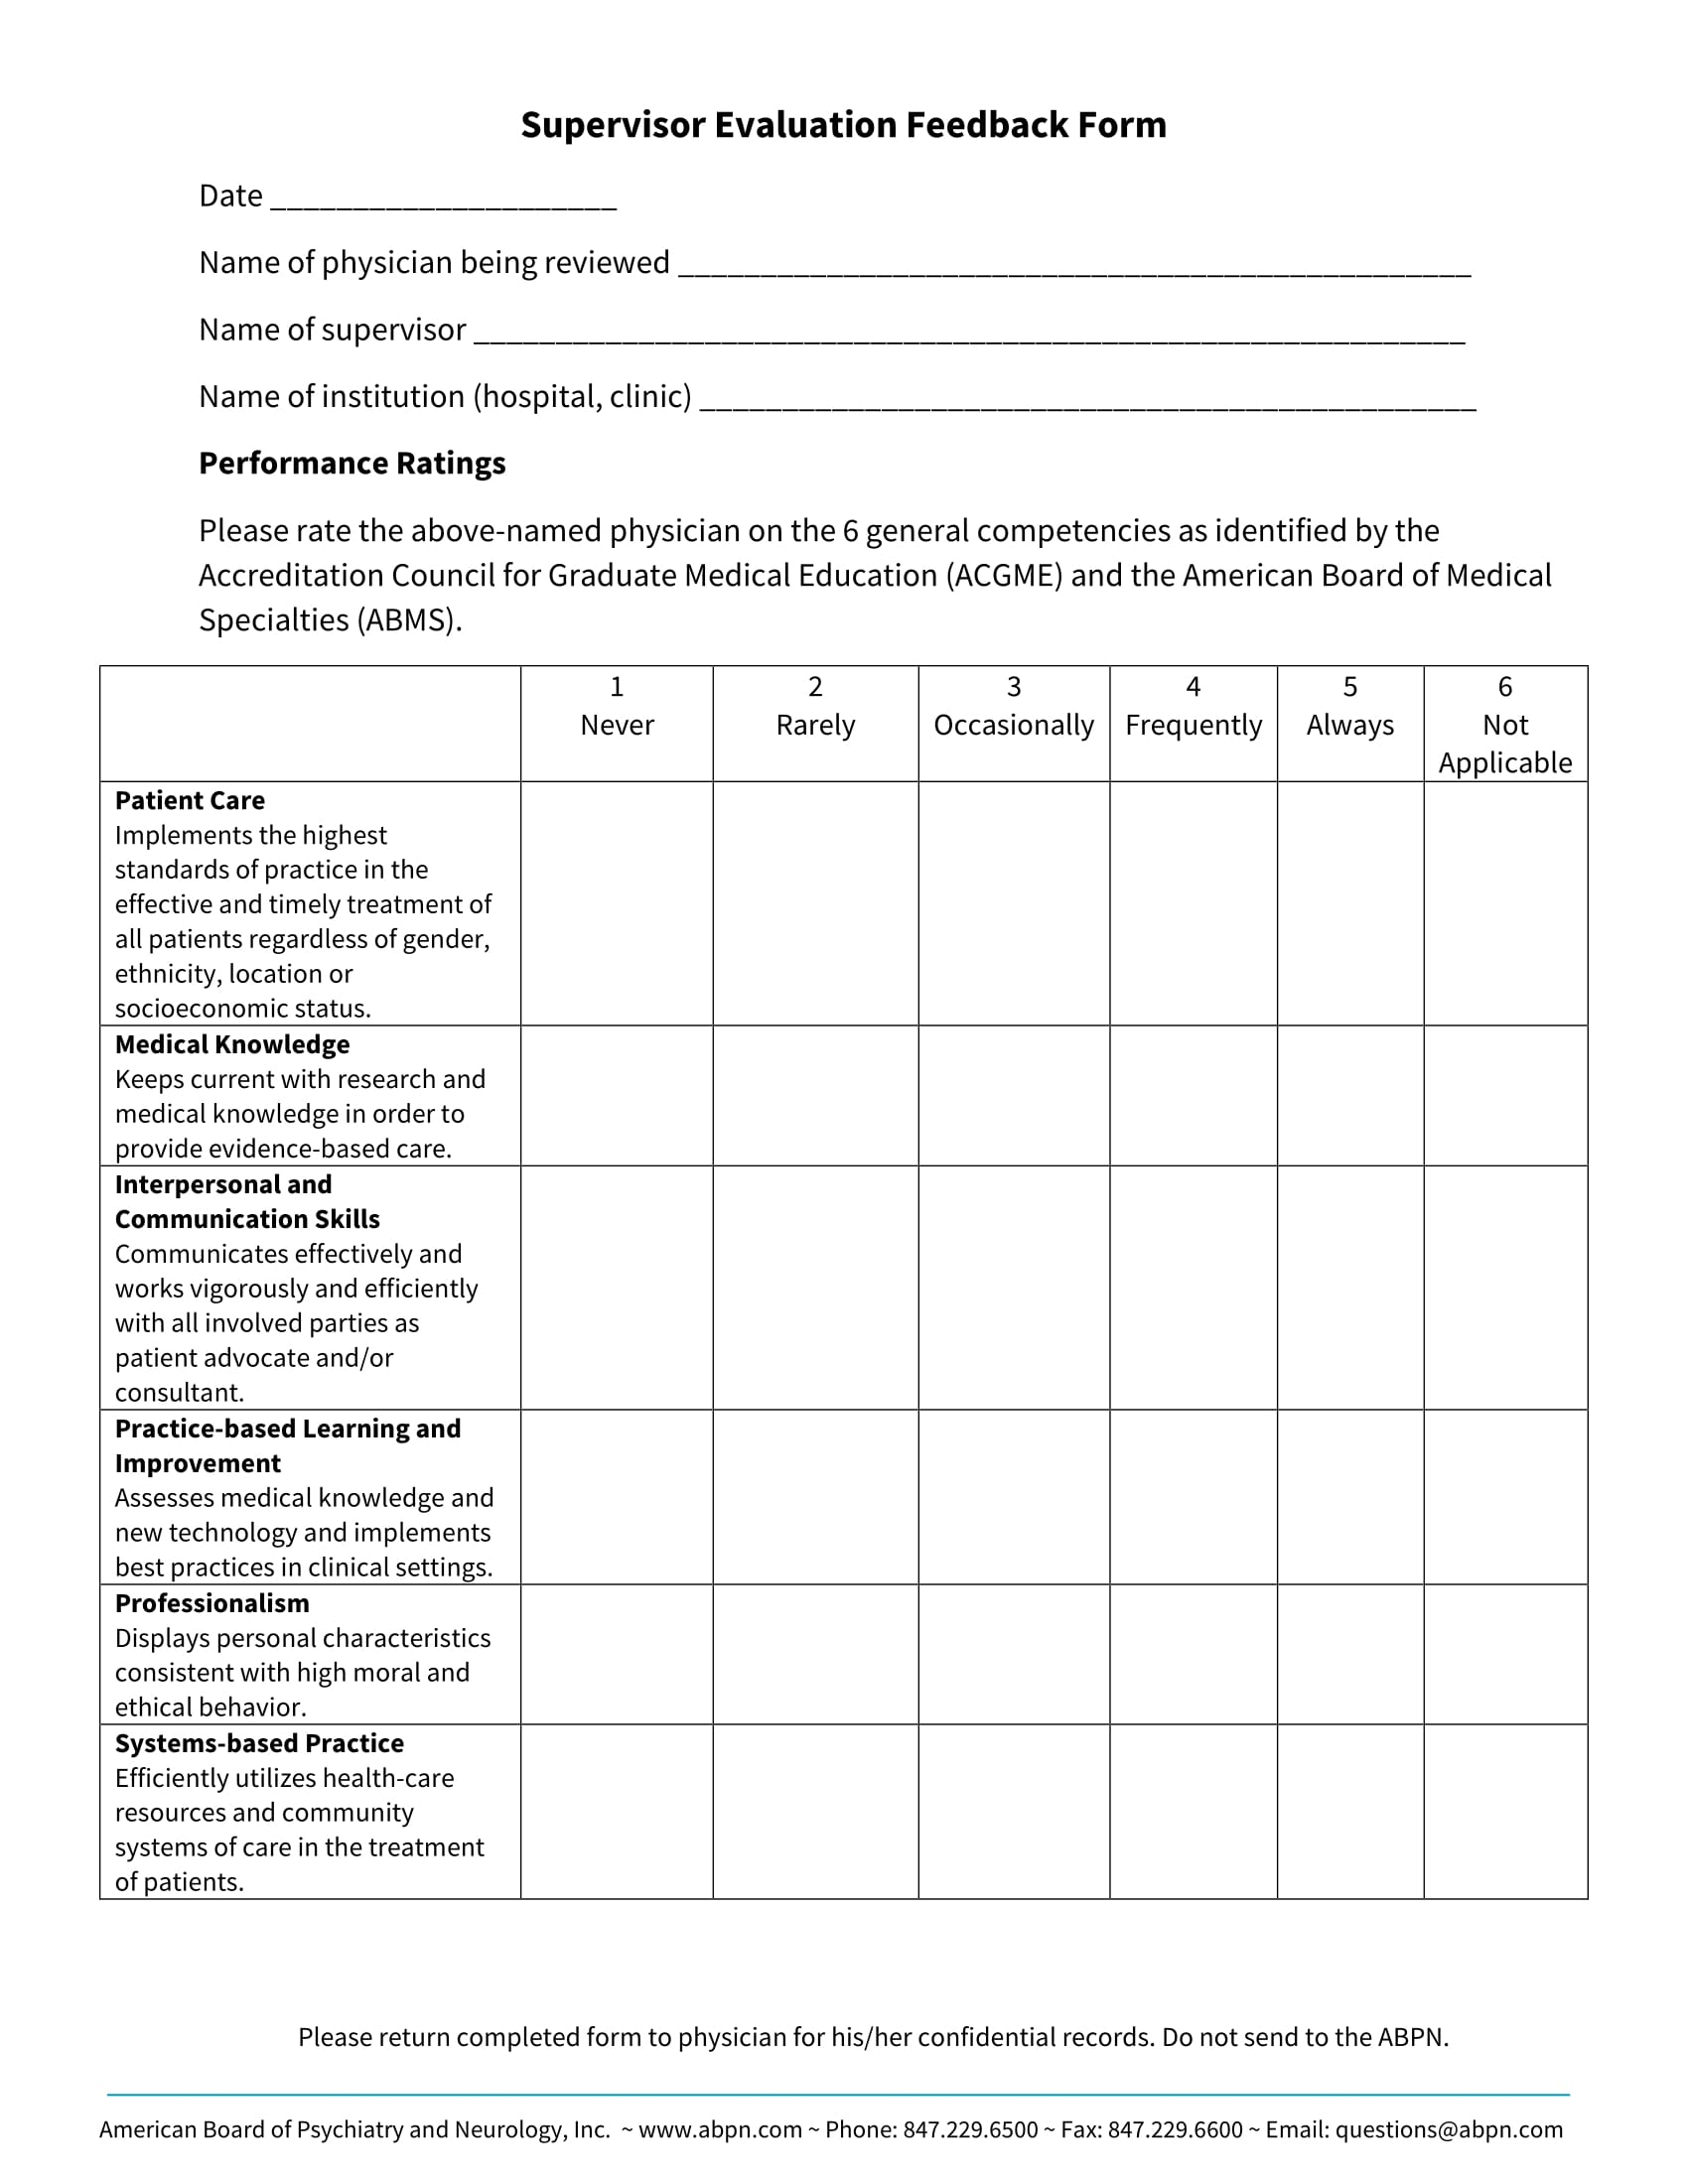 FREE 4 Superior Improvement Forms In PDF